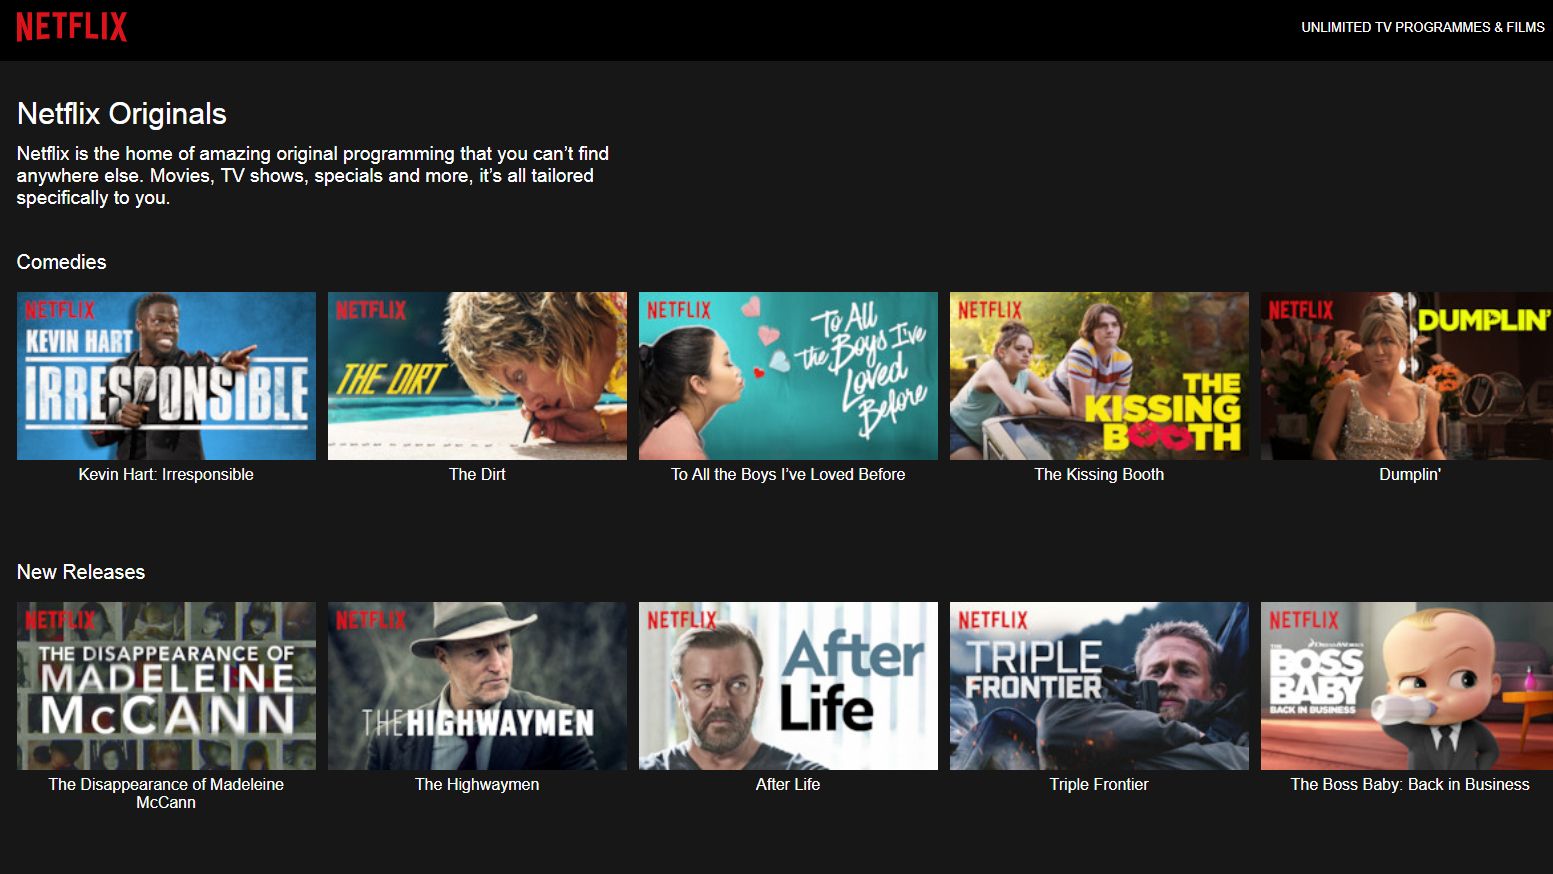 Chromiumbased Edge browser will likely support 4K Netflix streaming